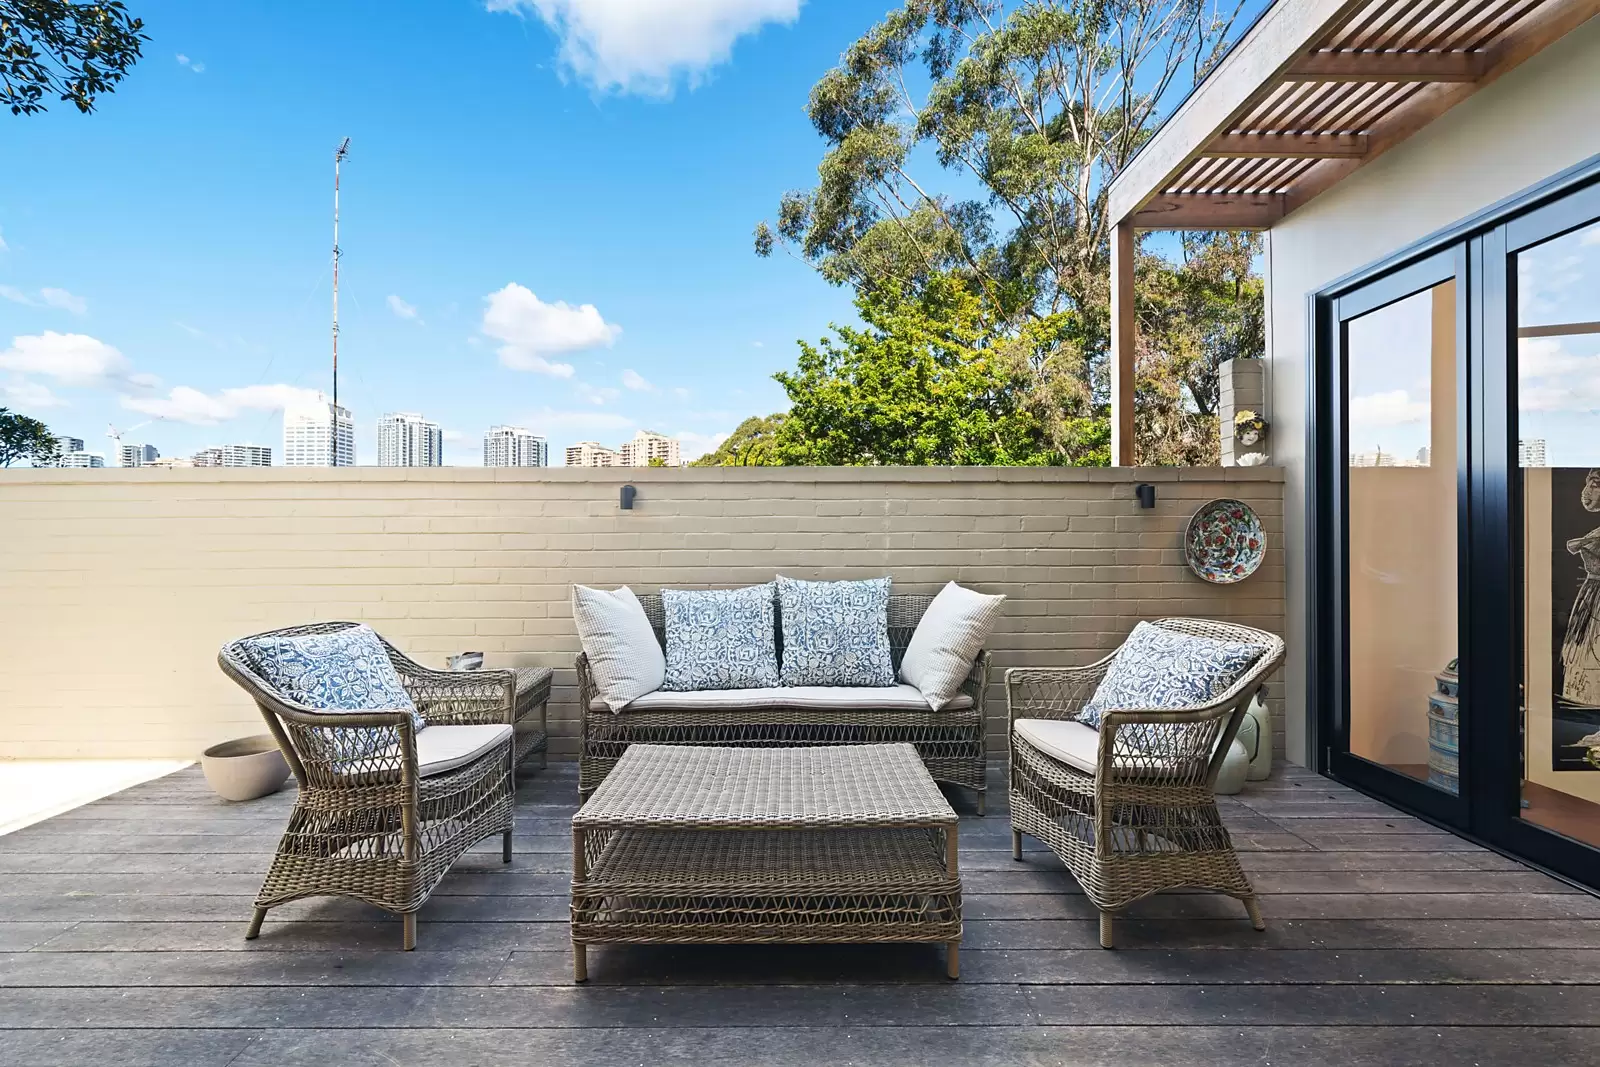 Photo #5: 6/275 Edgecliff Road, Woollahra - Sold by Sydney Sotheby's International Realty